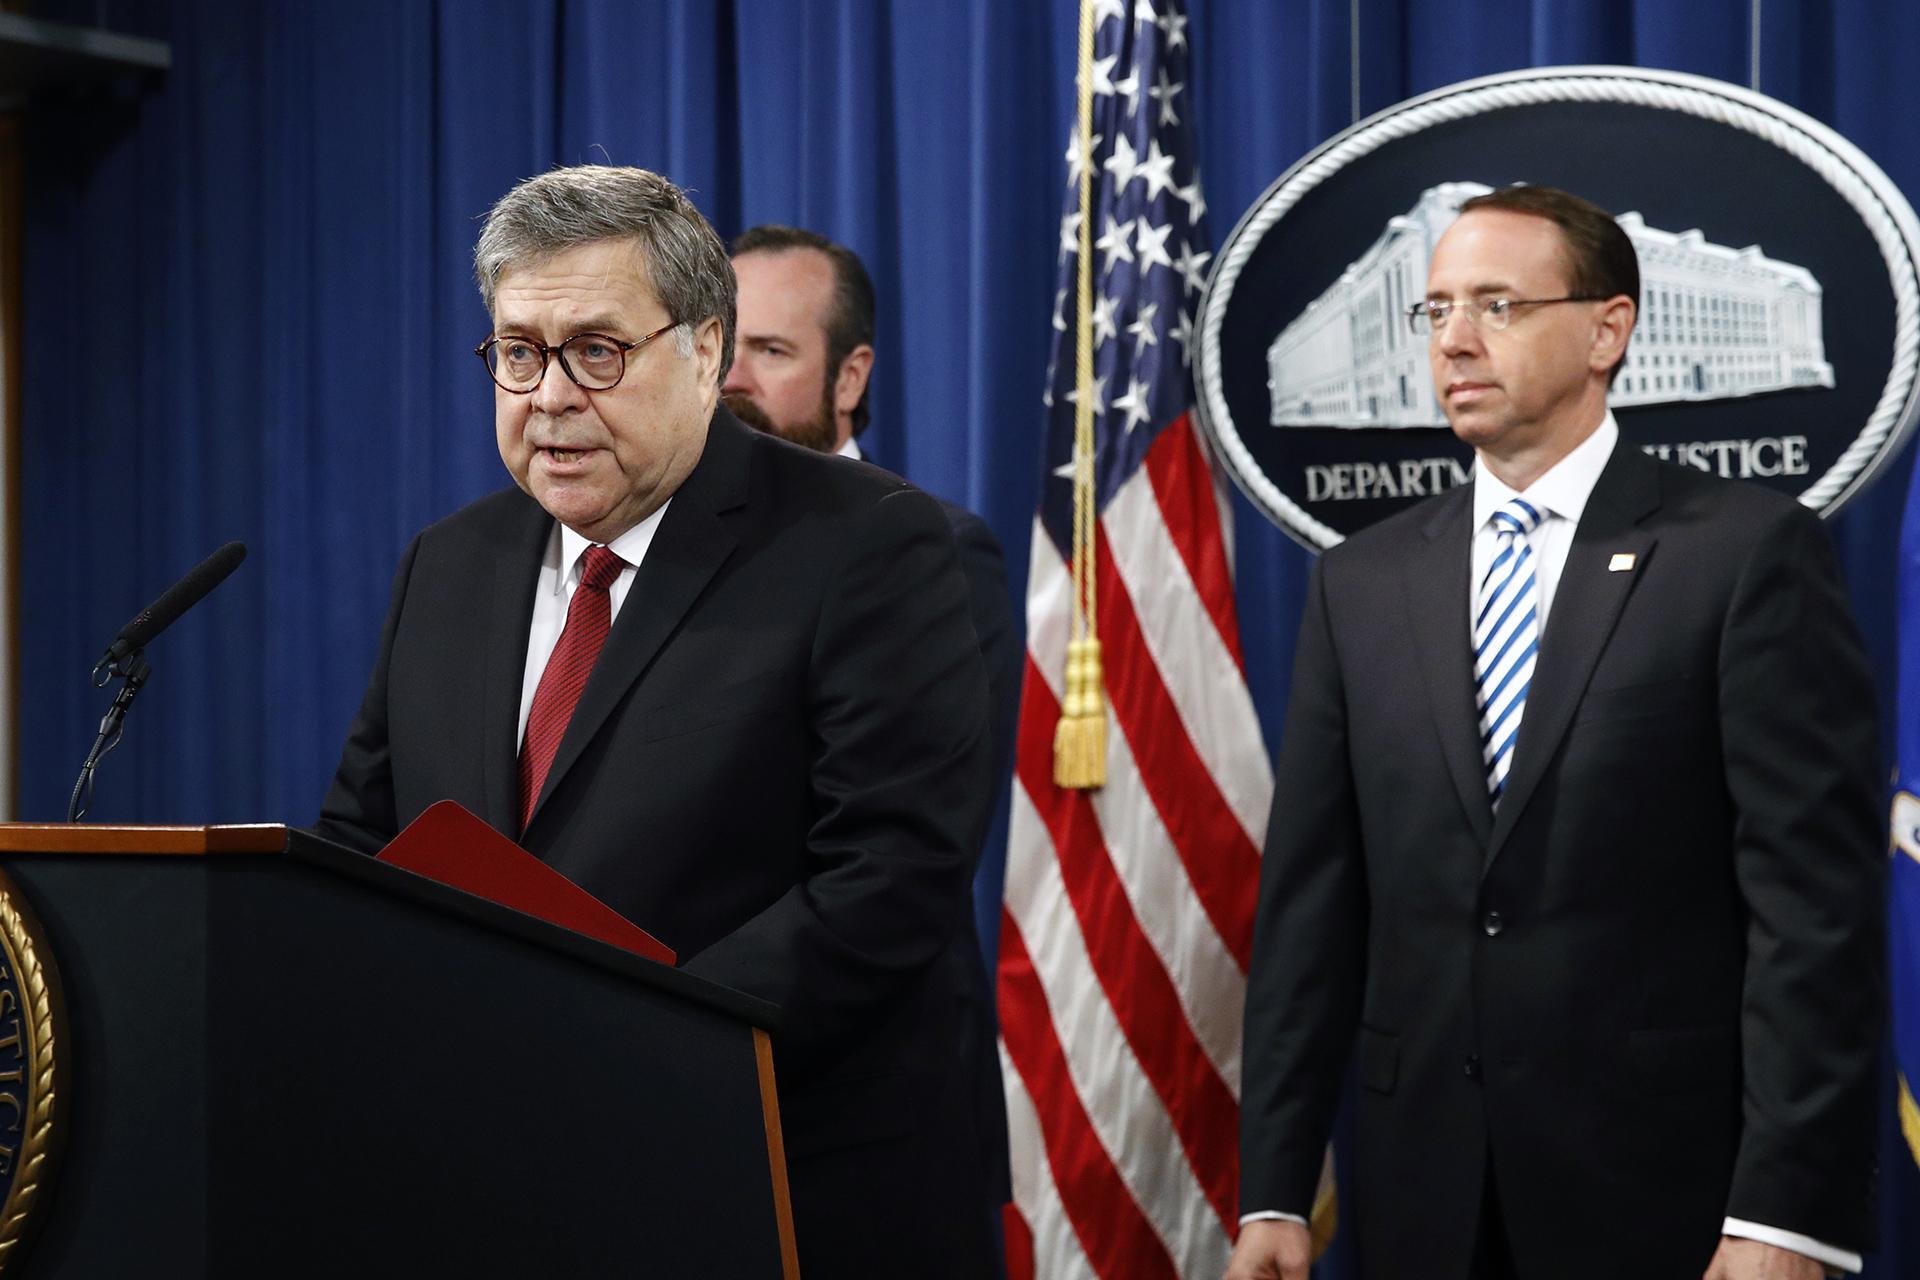 Attorney General William Barr speaks alongside Deputy Attorney General Rod Rosenstein, right, and Deputy Attorney General Ed O’Callaghan, rear left, about the release of a redacted version of special counsel Robert Mueller'’s report during a news conference, Thursday, April 18, 2019, at the Department of Justice in Washington. (AP Photo / Patrick Semansky)